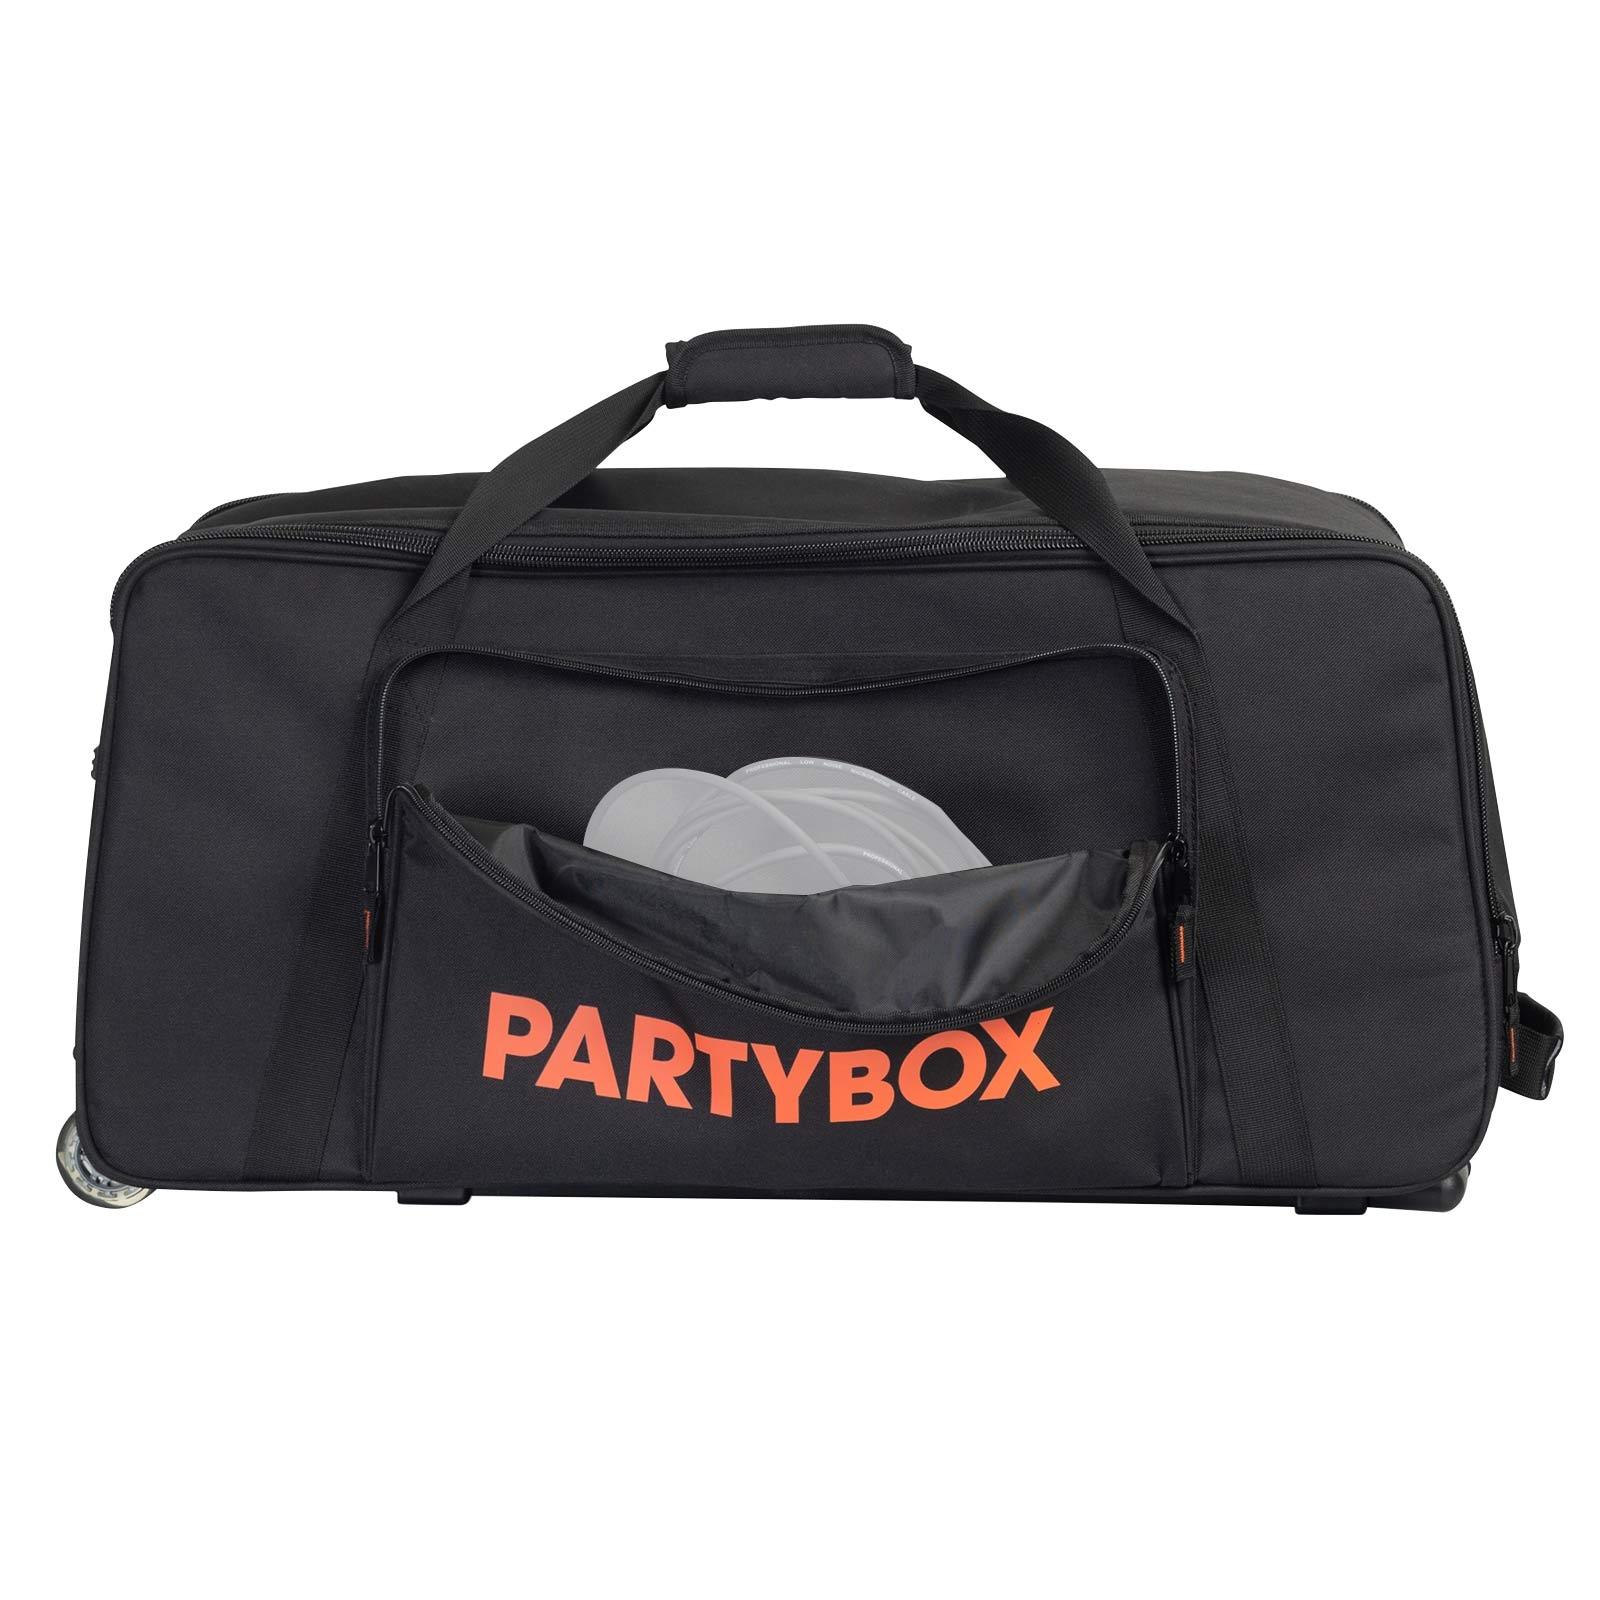 JBL Bags JBLPARTYBOX200300-TRANSPORT with Wheels - Fits Many Speakers - image 4 of 9